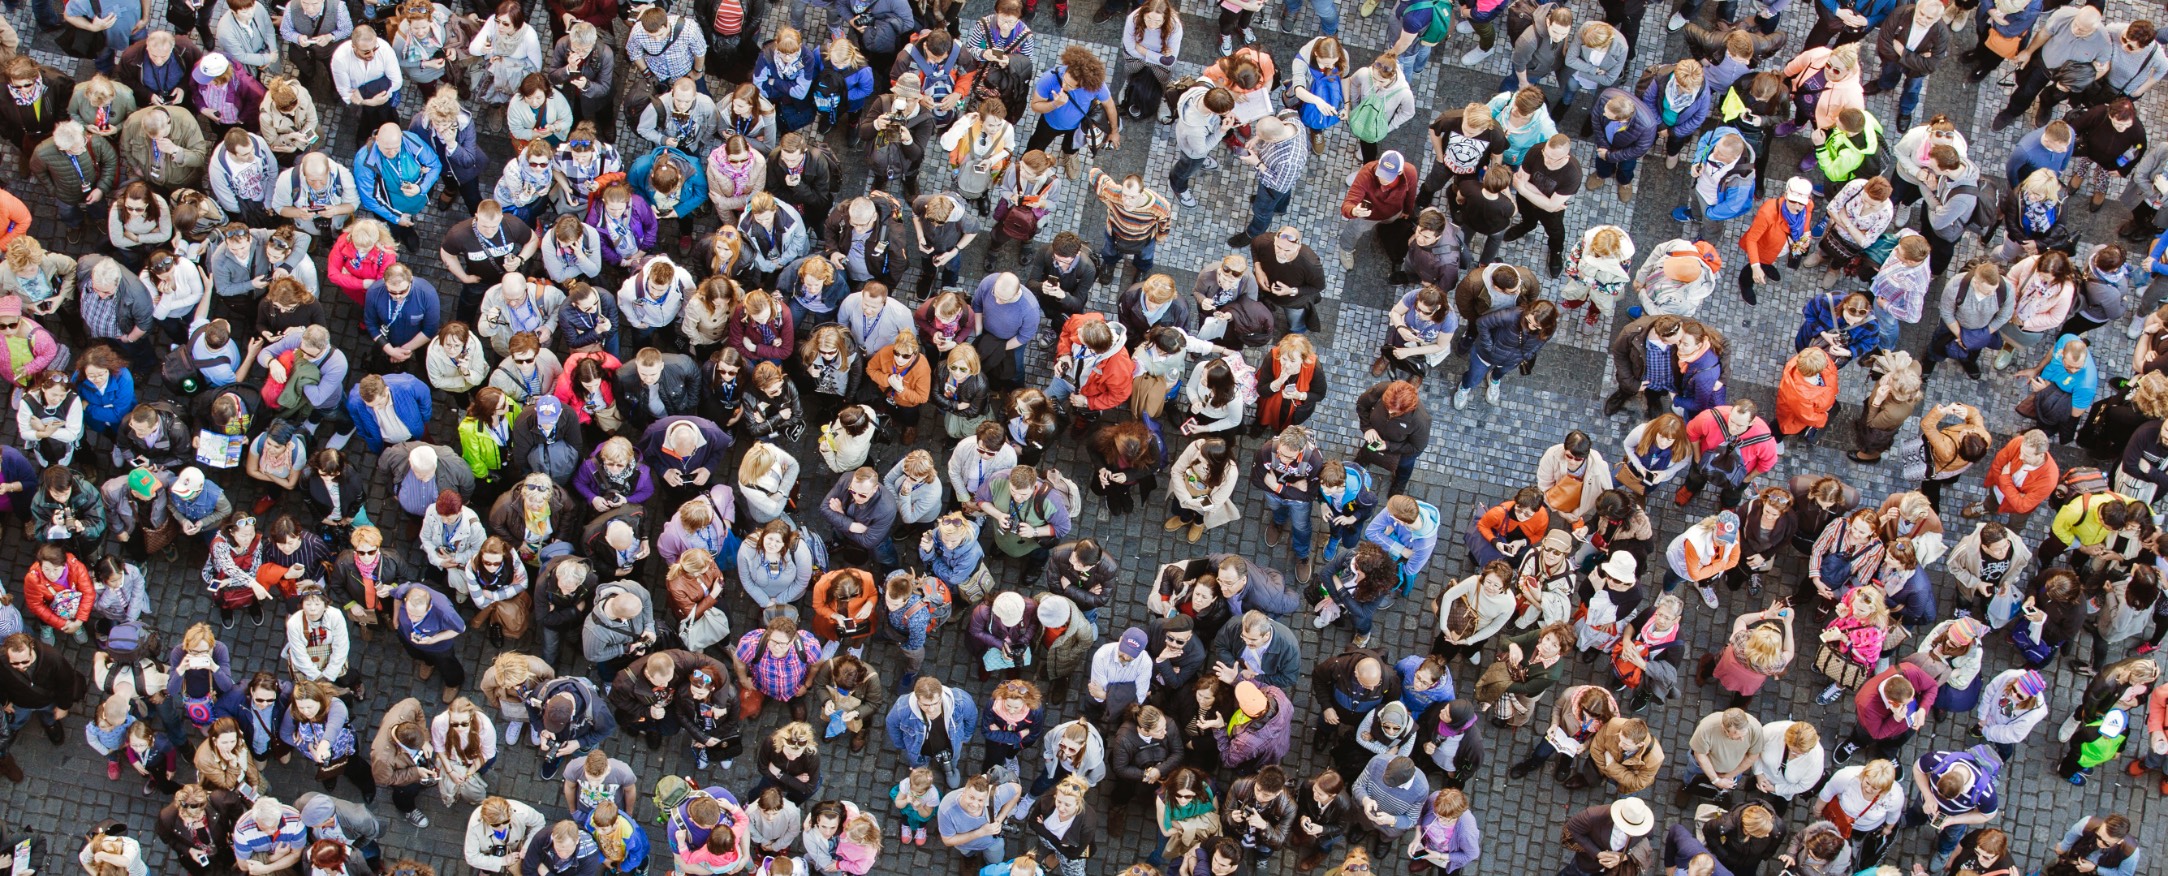 CloudResearch_Blog_How to Obtain an Online National Sample Stratified by Wealth_Crowd of people overhead shot@2x